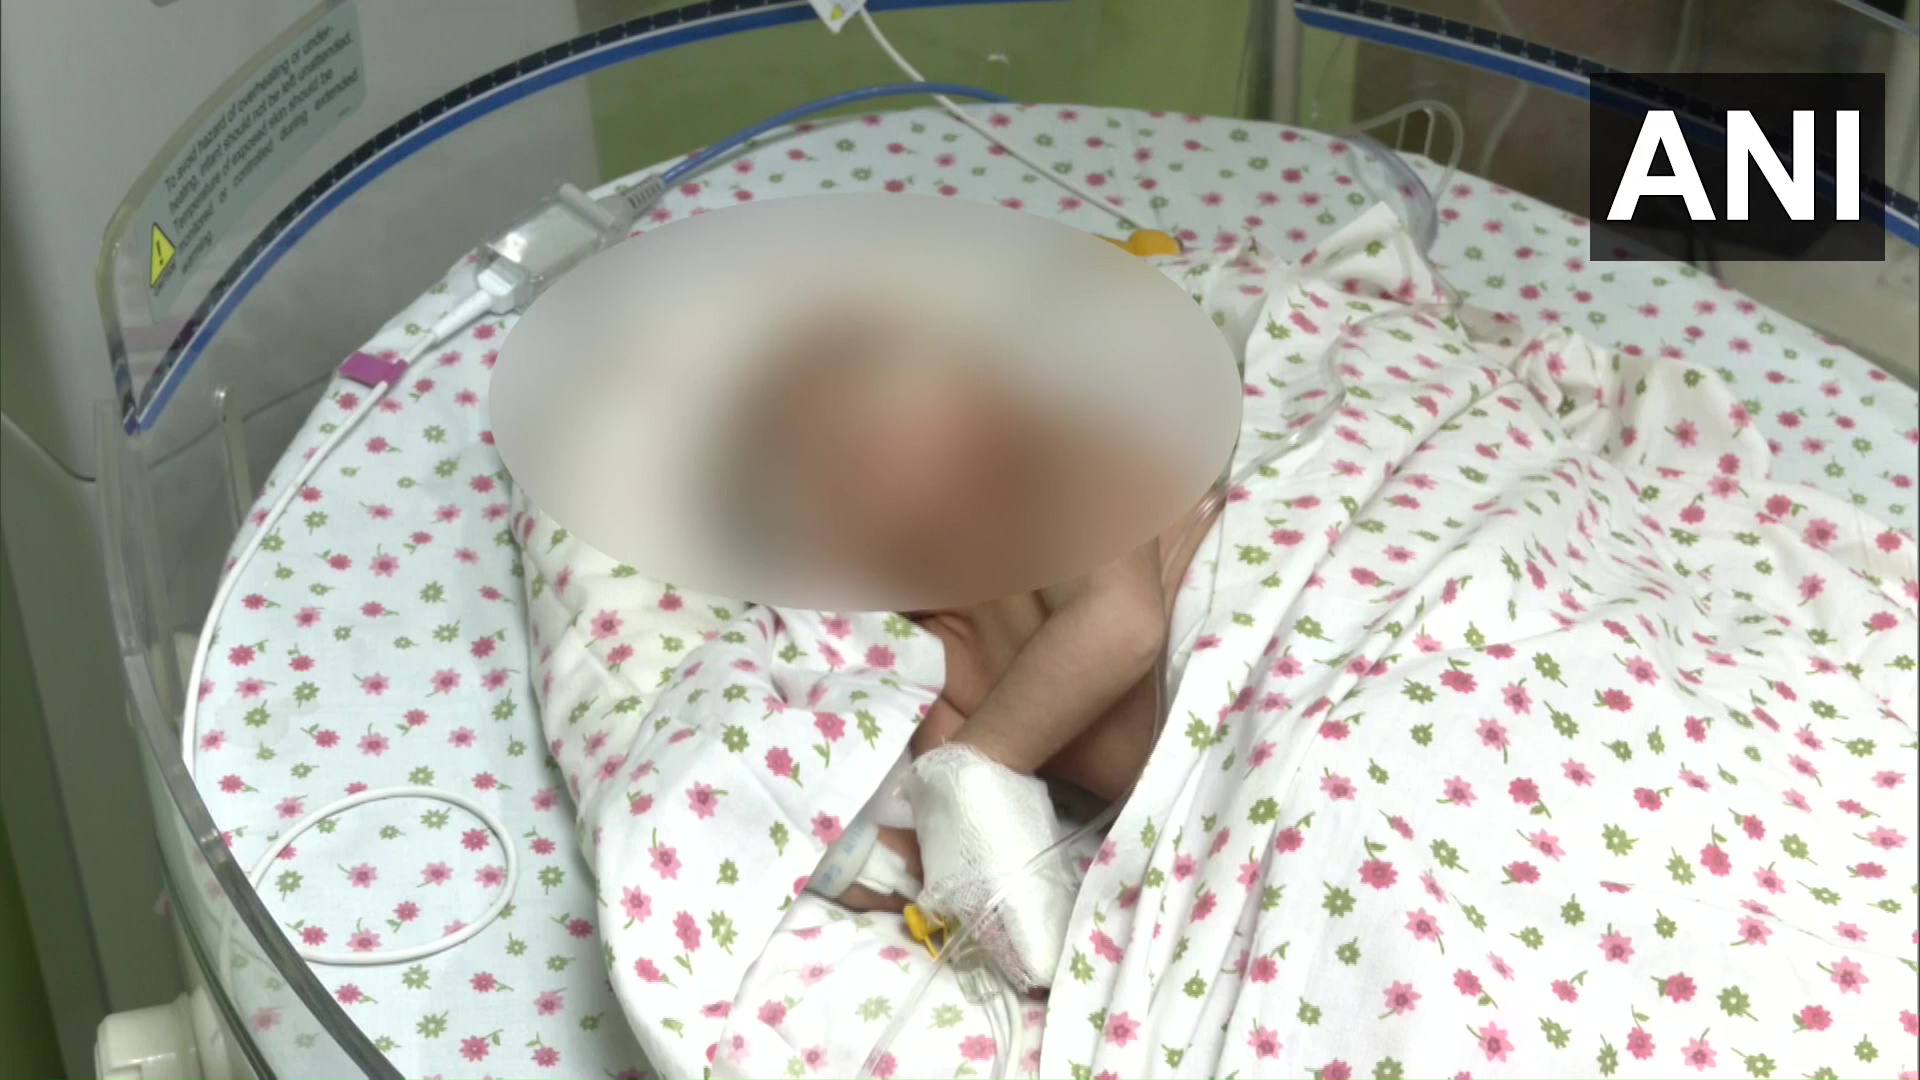 Newborn baby girl found in a garbage dump with umbilical cord